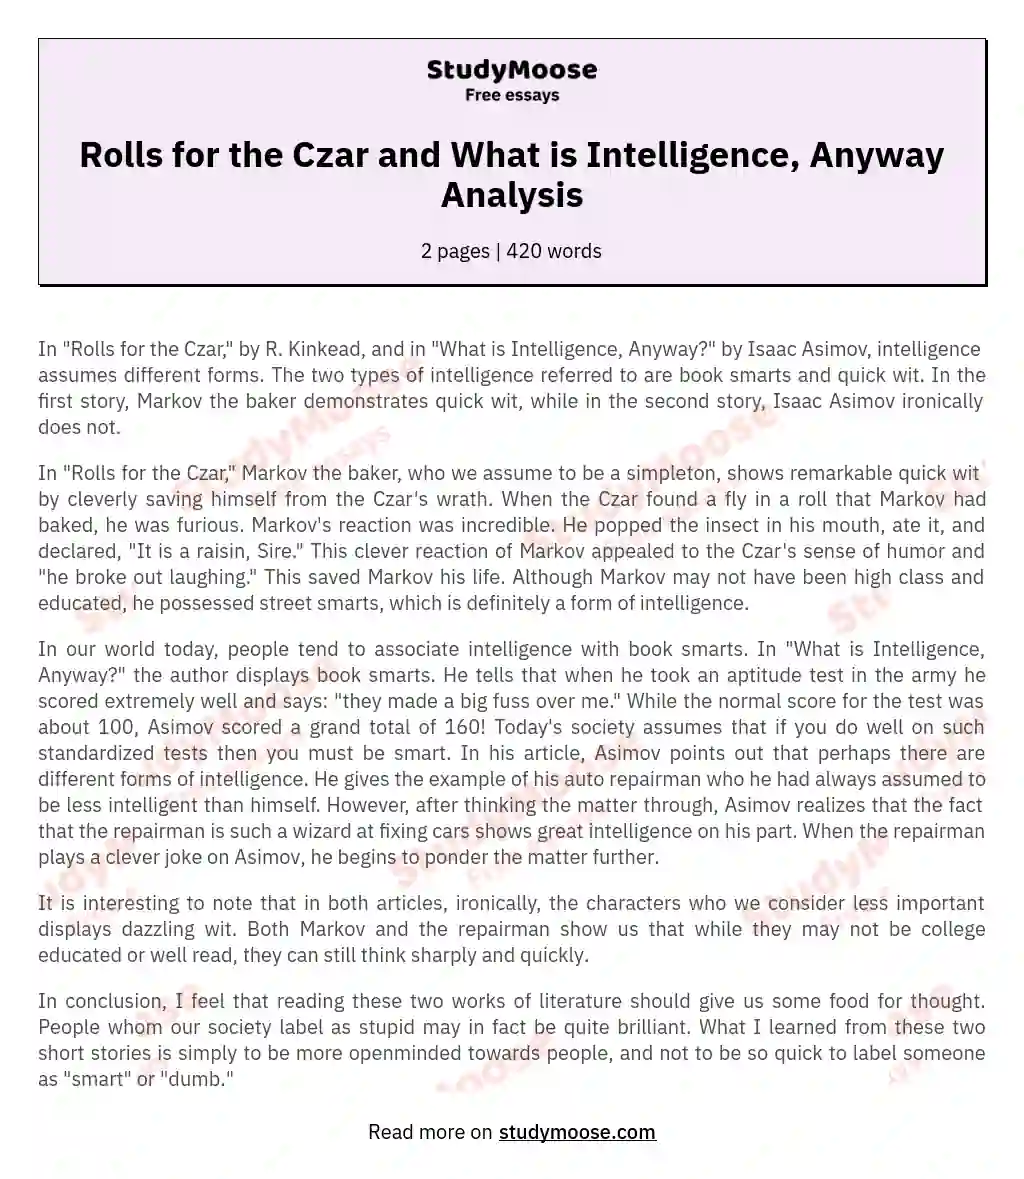 Rolls for the Czar and What is Intelligence, Anyway Analysis essay